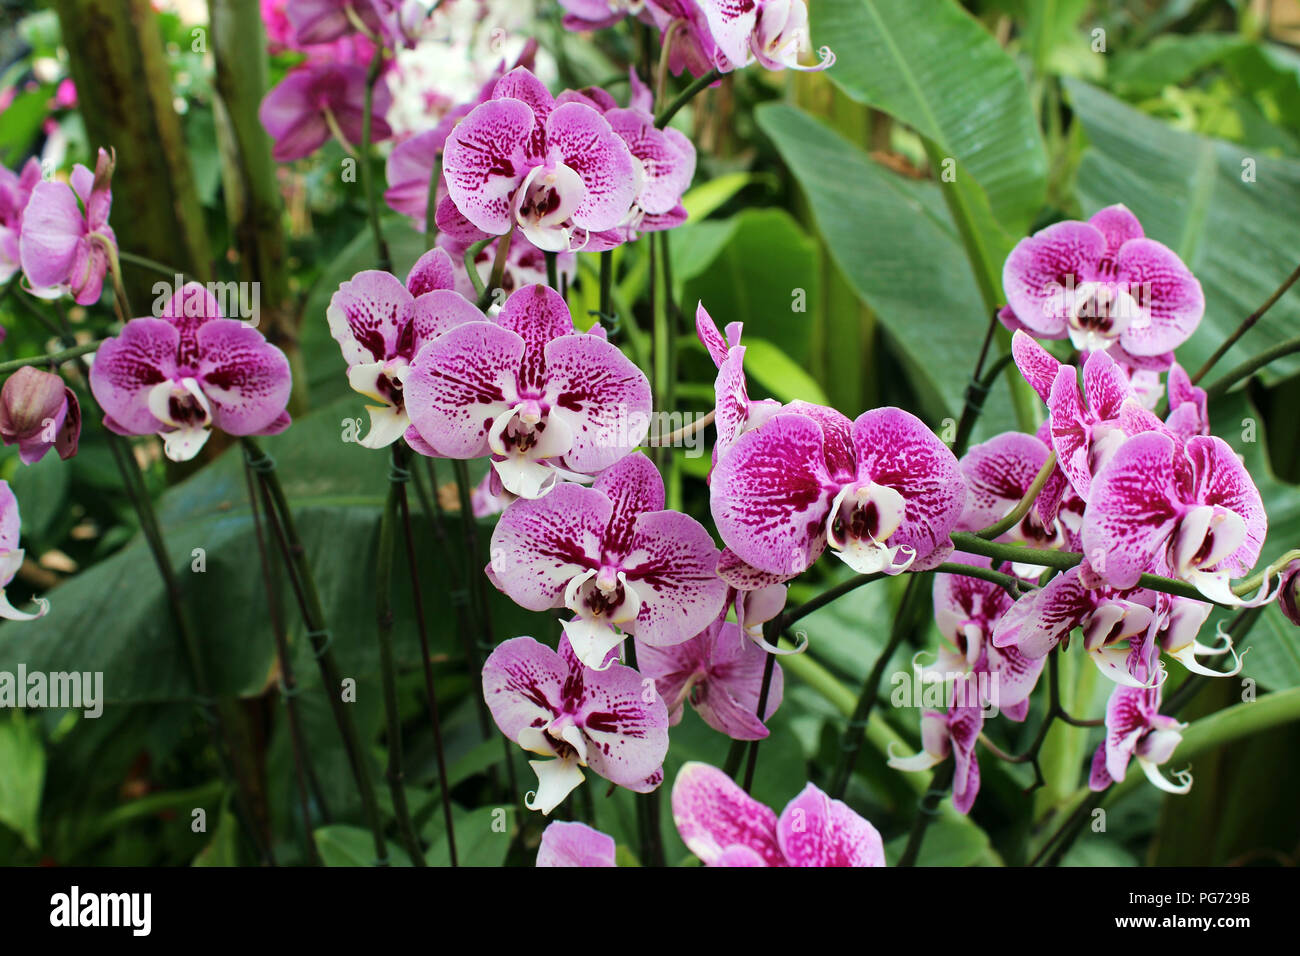 A cluster of Doritaenopsis orchids in full bloom Stock Photo